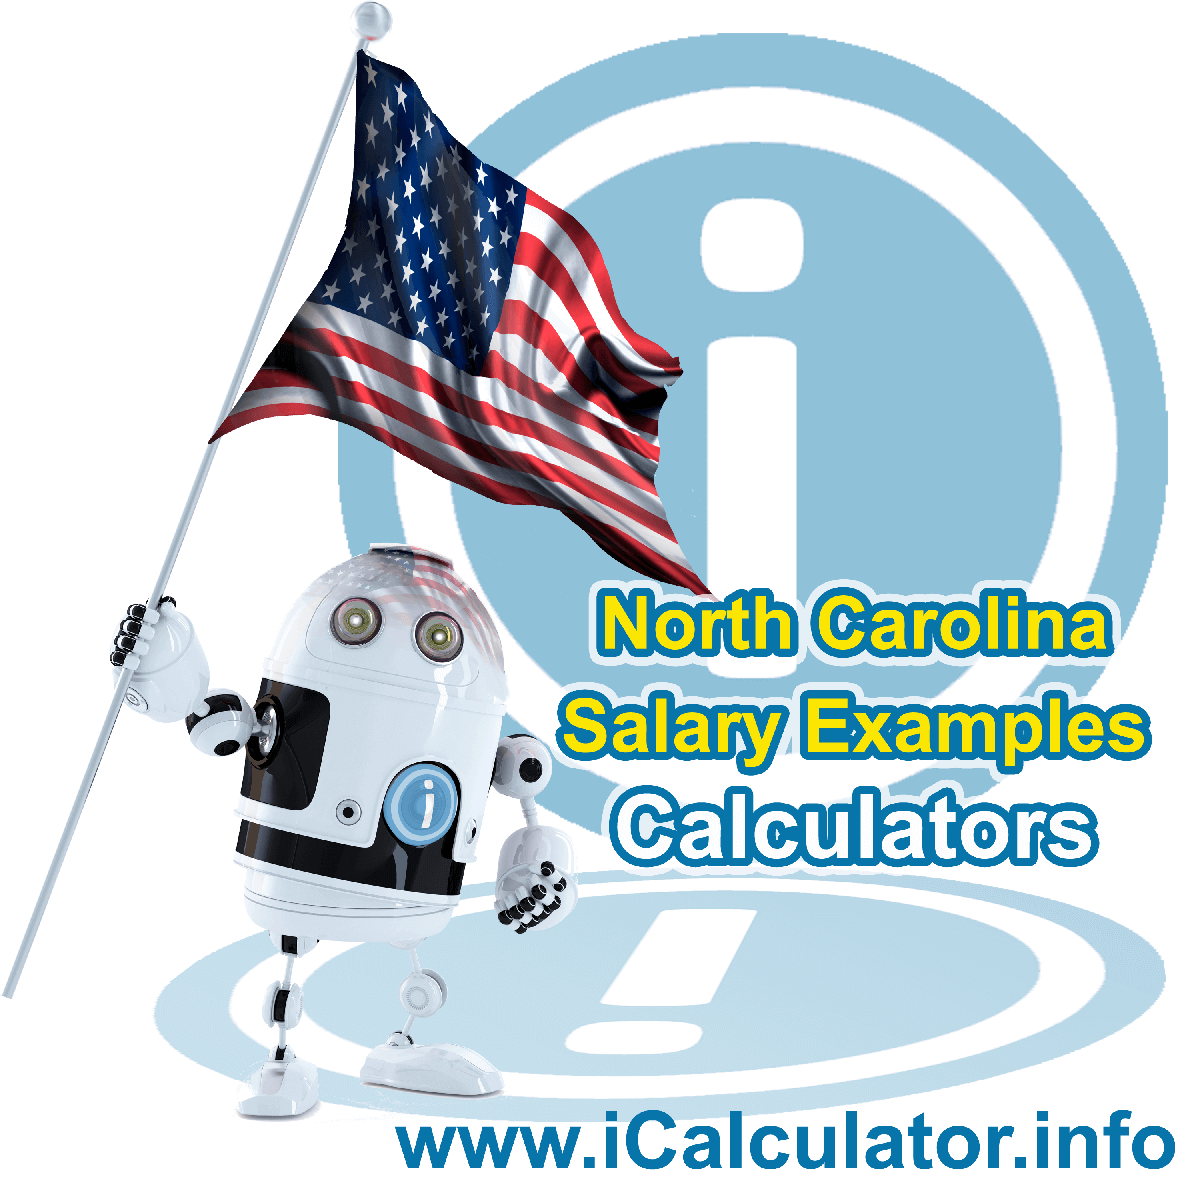 North Carolina Salary Example for $ 100,000.00 in 2023 | iCalculator™ | $ 100,000.00 salary example for employee and employer paying North Carolina State tincome taxes. Detailed salary after tax calculation including North Carolina State Tax, Federal State Tax, Medicare Deductions, Social Security, Capital Gains and other income tax and salary deductions complete with supporting North Carolina state tax tables 